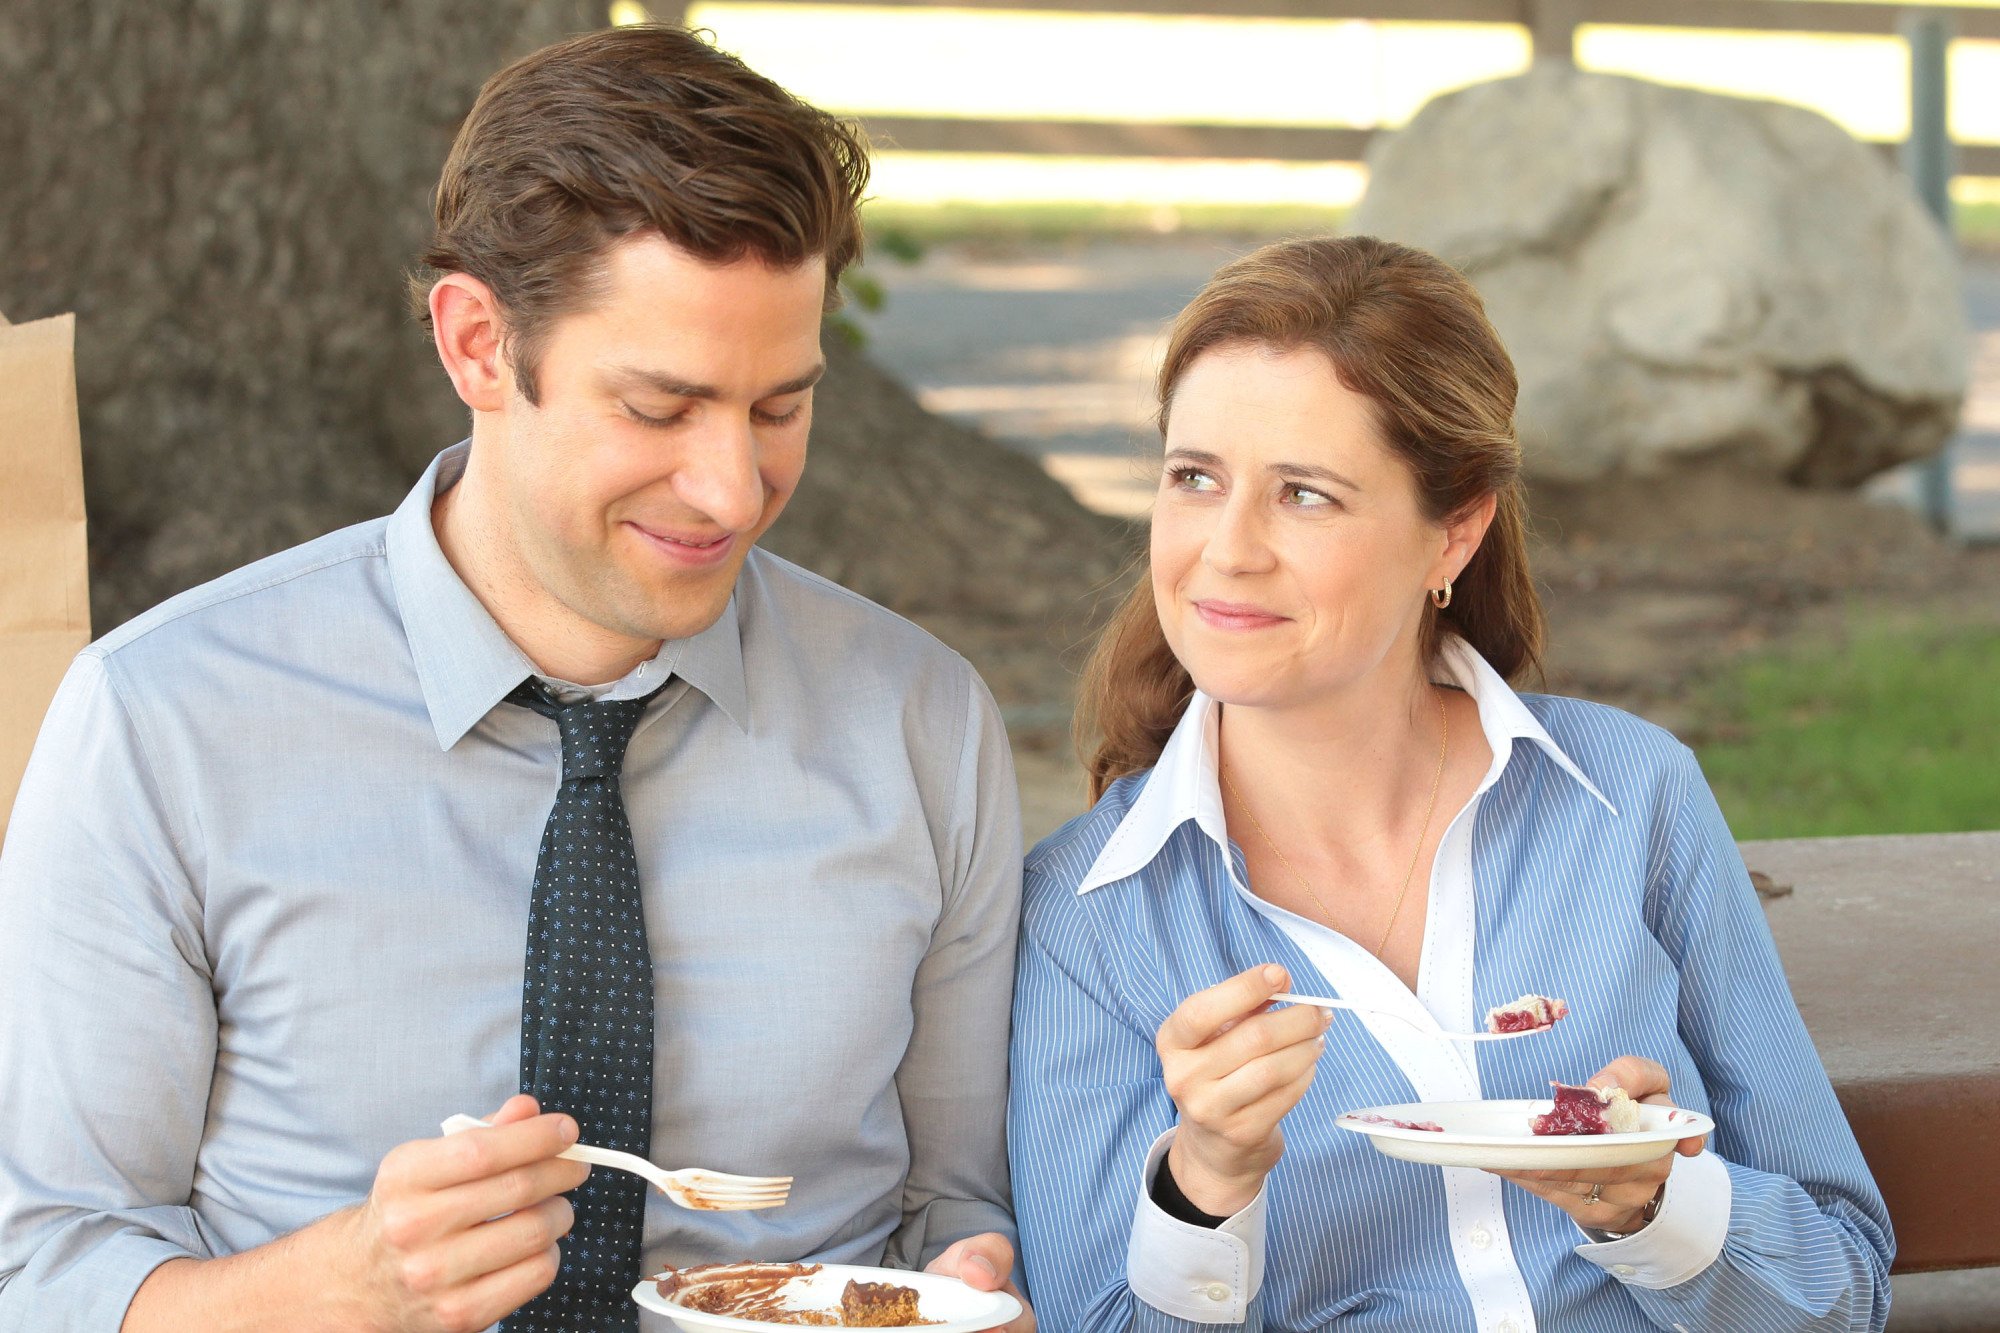 A man (John Krasinski) and a woman (Jenna Fischer) sitting on a bench eating slices of pie.